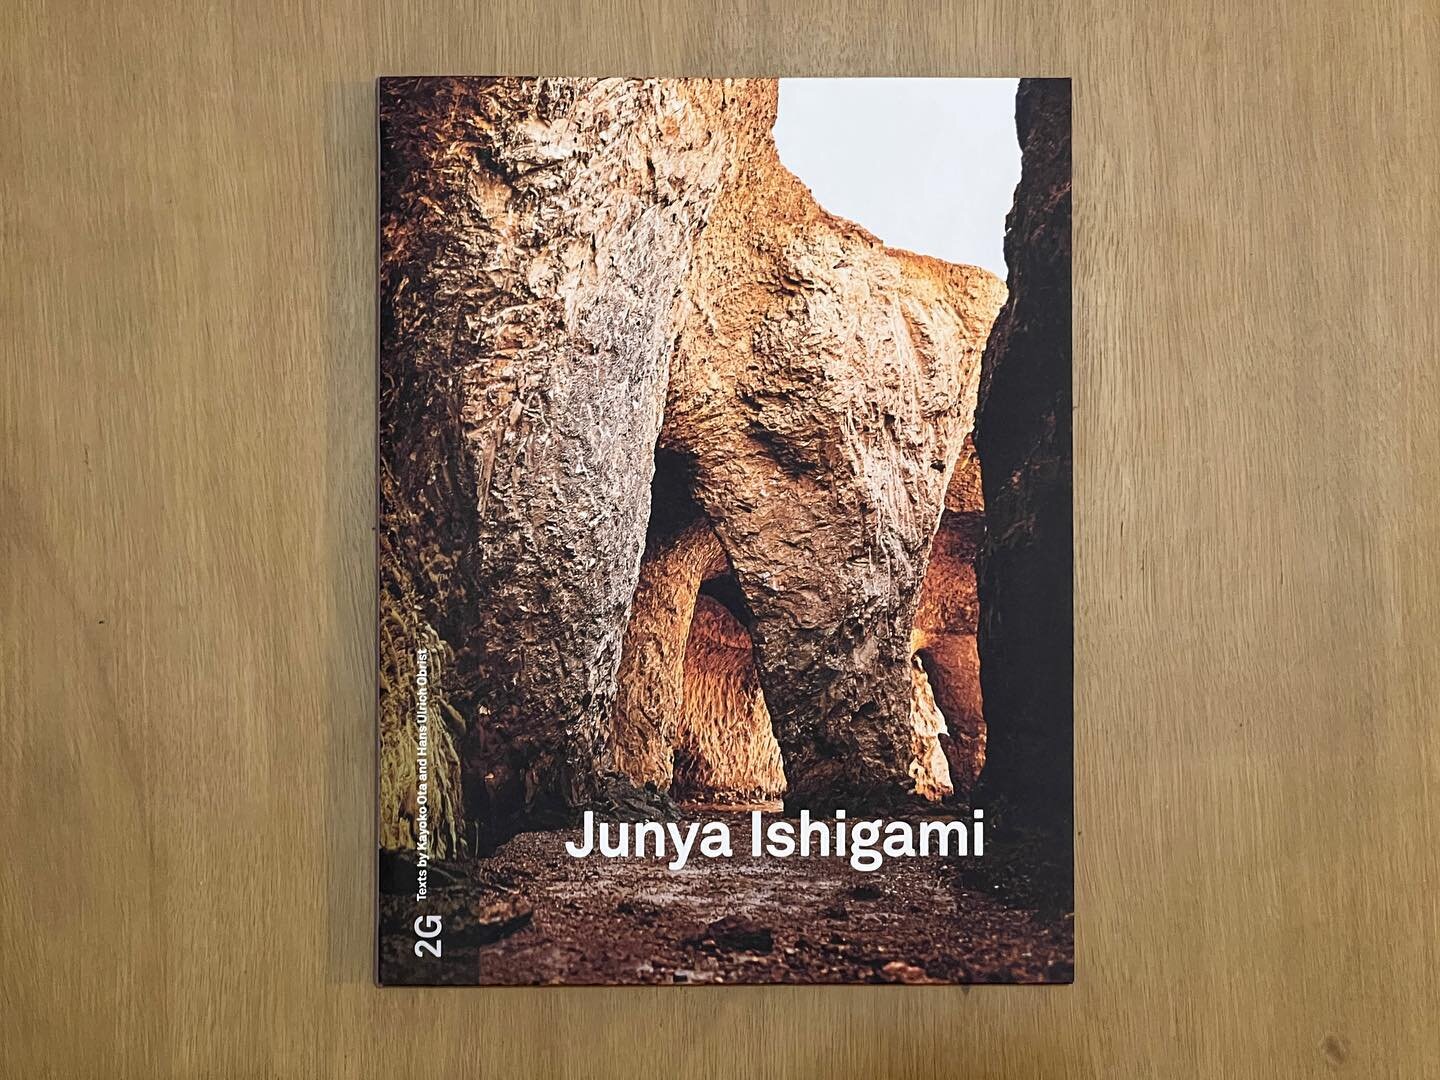 2G: JUNYA ISHIGAMI

Japanese architect Junya Ishigami (born 1974) who became known for his proposal for the Japan Pavilion at the Venice Architecture Biennale 2008.  The following year, he completed the Kanagawa Institute of Technology Workshop and w